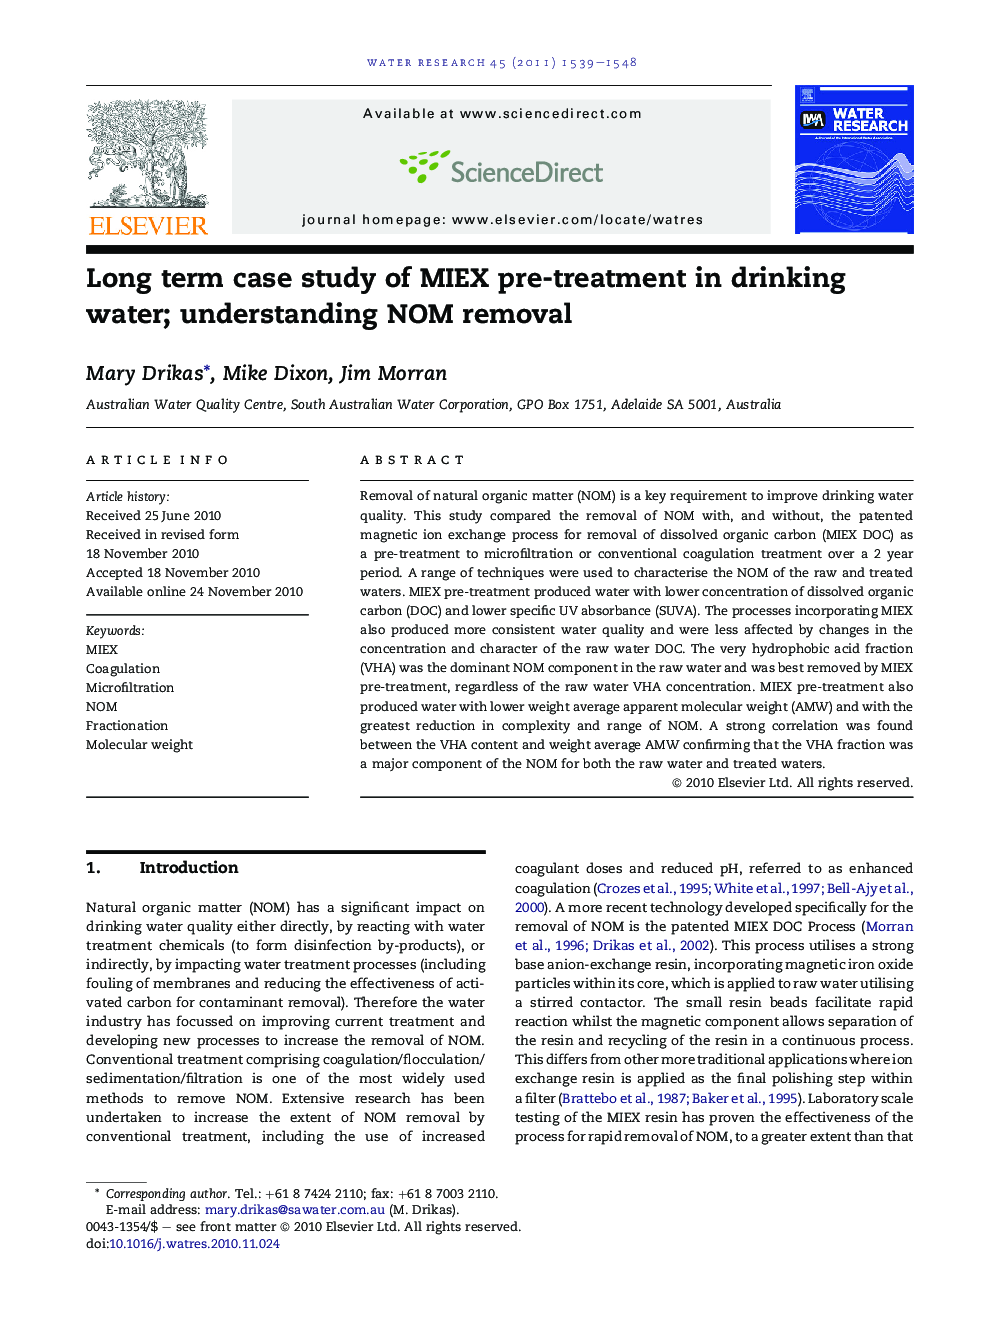 Long term case study of MIEX pre-treatment in drinking water; understanding NOM removal